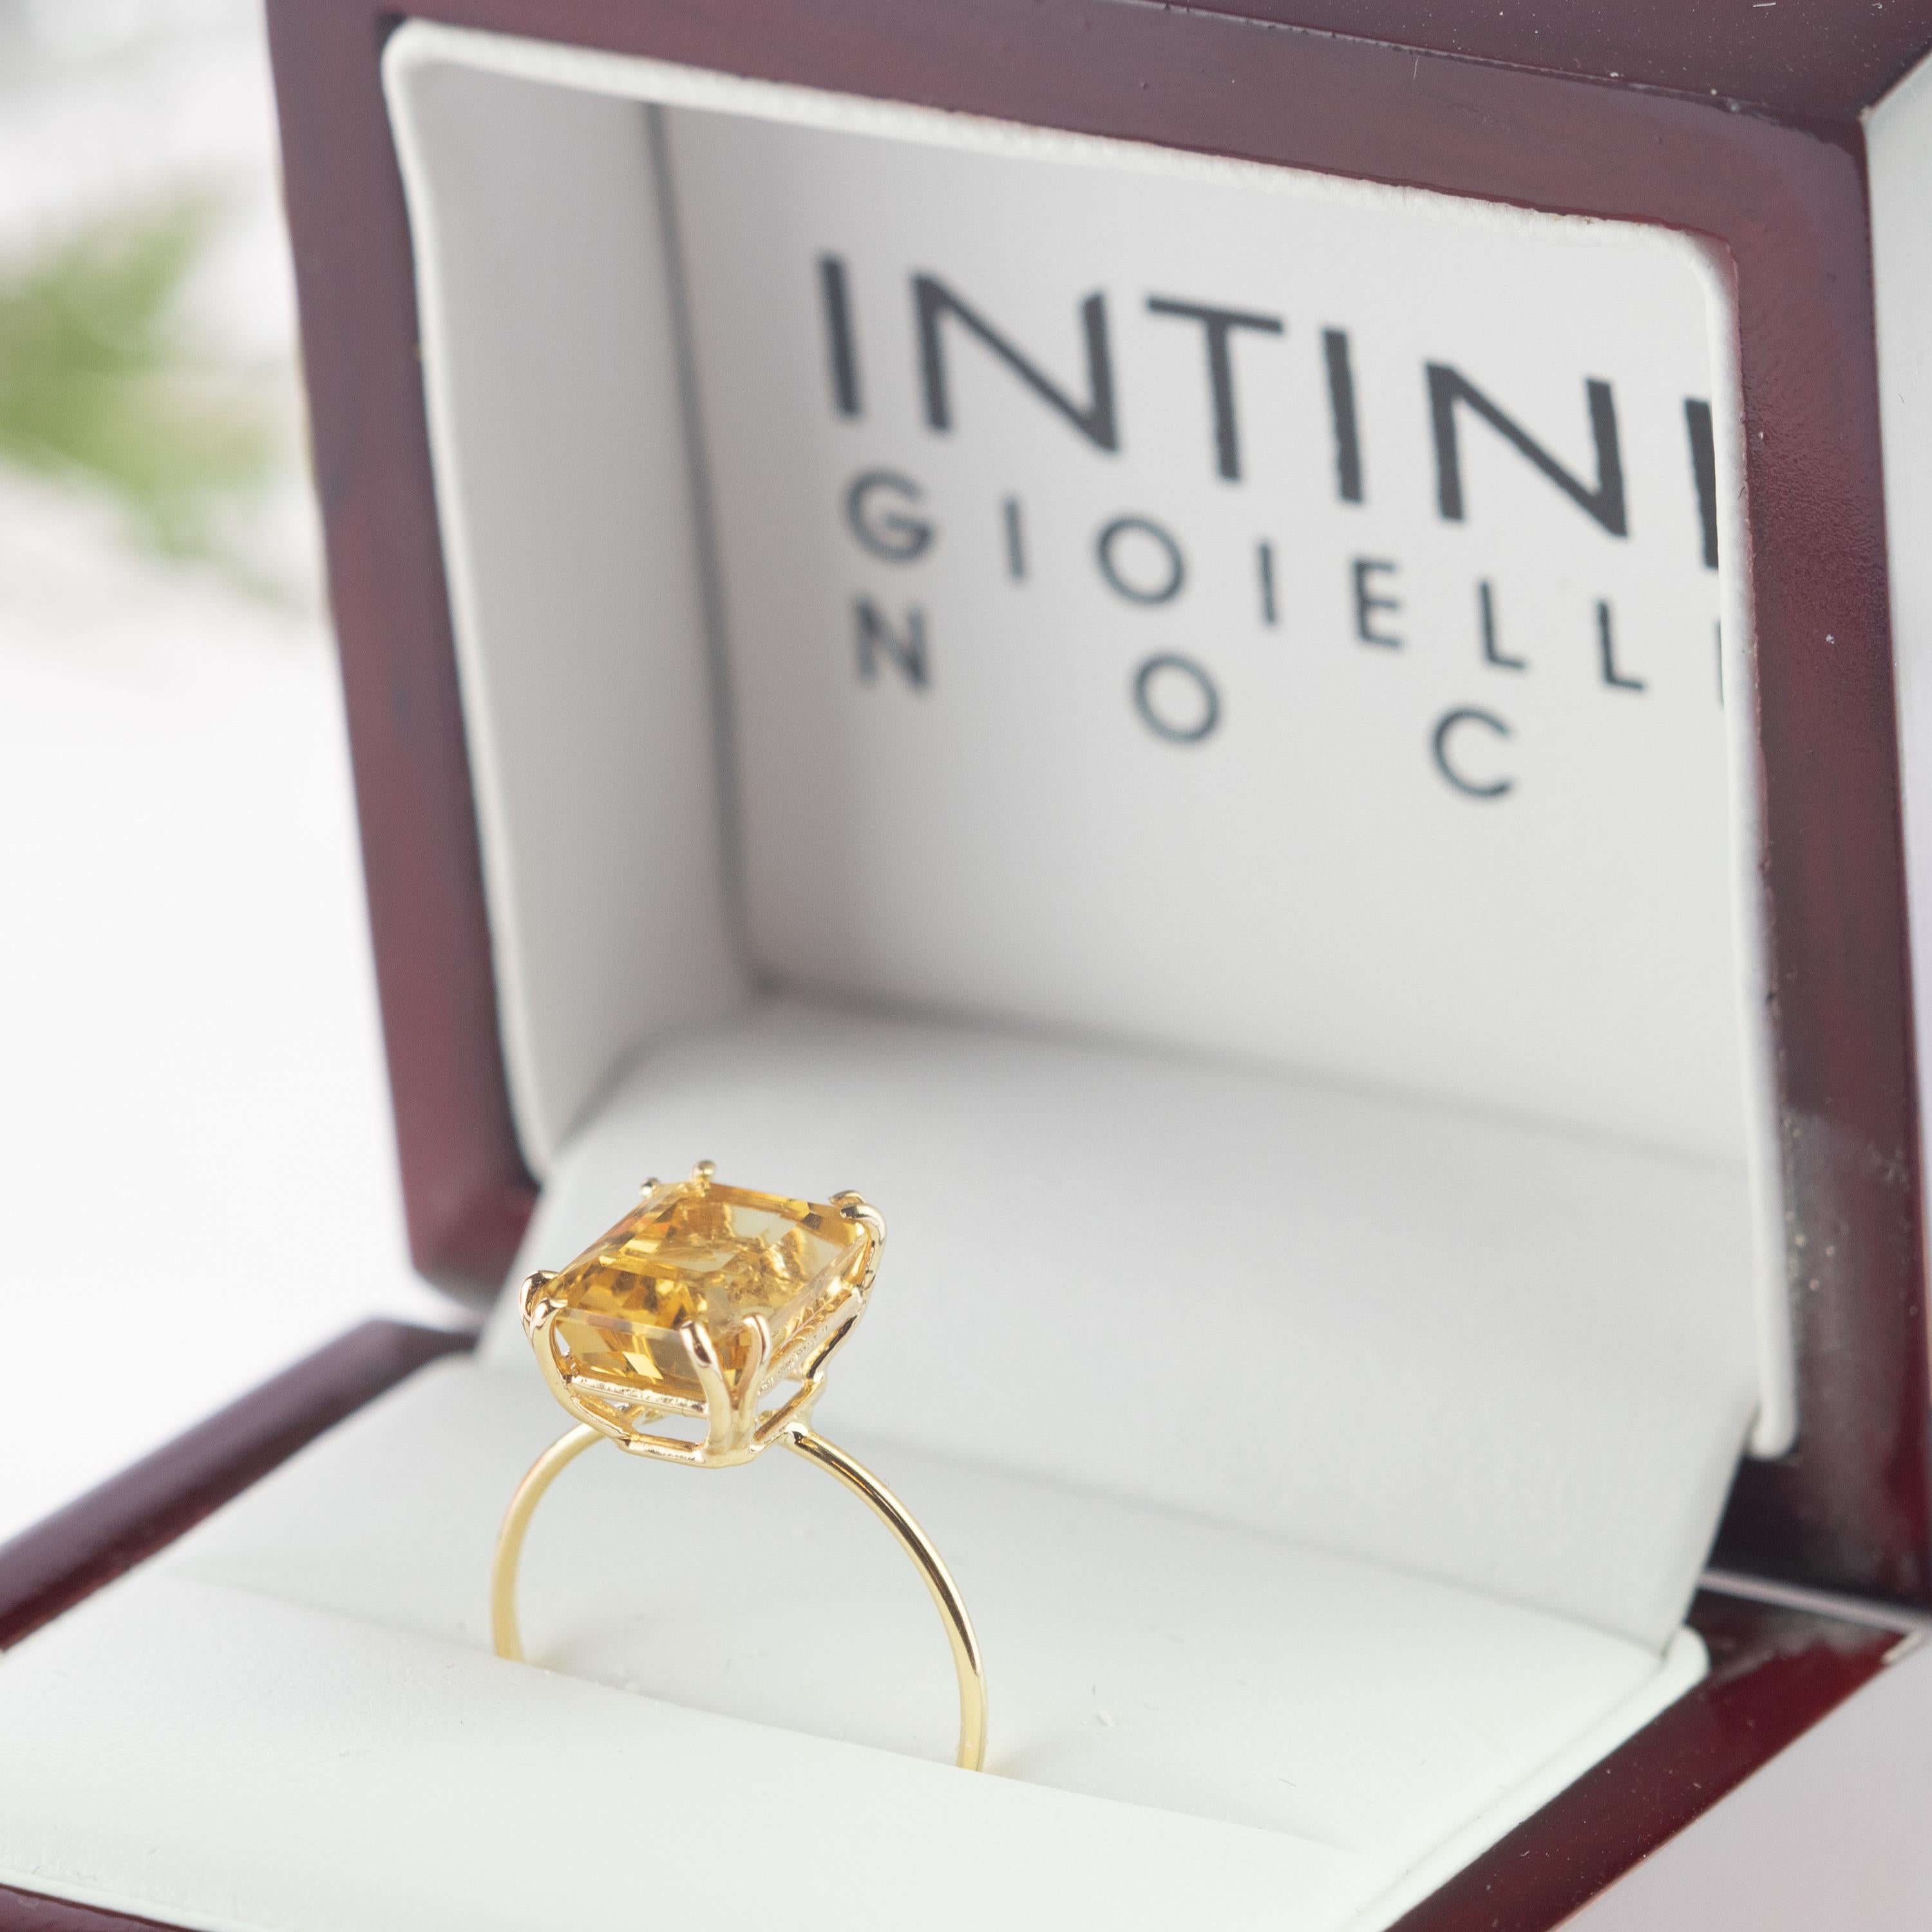 This extraordinary citrine quartz (6 carats) ring. All artfully set and crafted in 9k yellow gold to create this stunning piece of jewelry. This artwork is for a fresh, young and modern woman.

Inspired by the sun, the quartz resembles the fire that